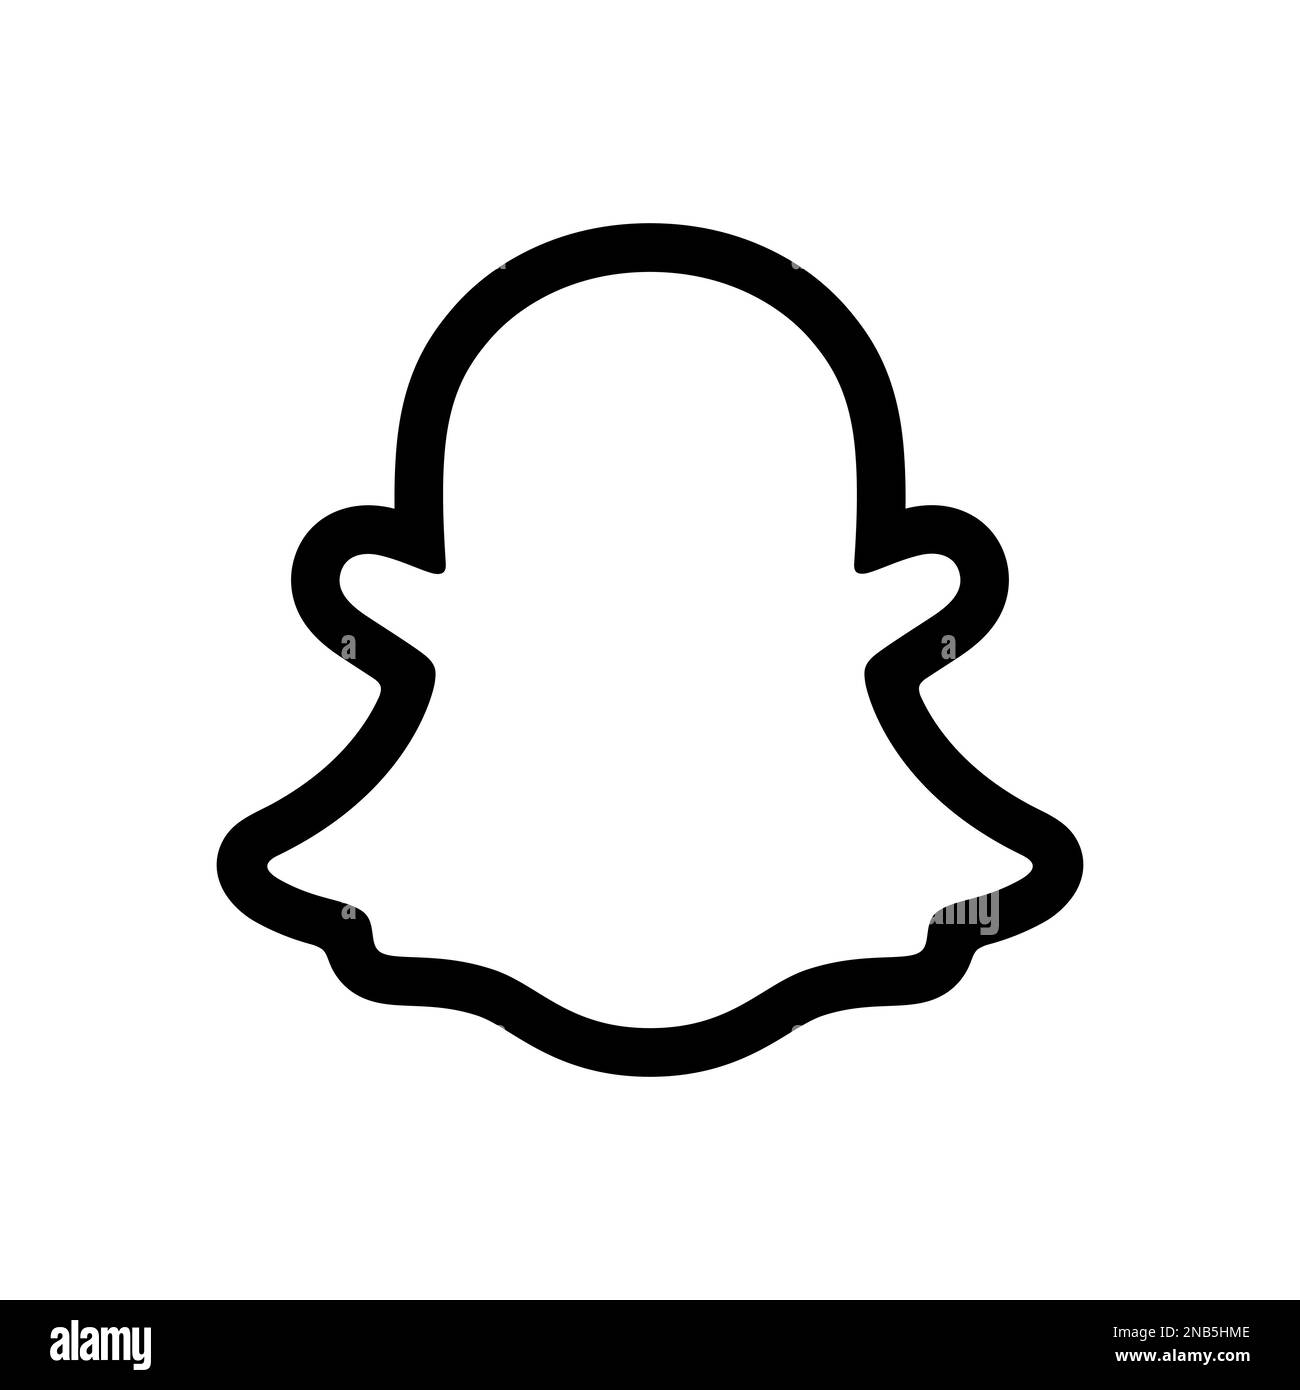 Snapchat instant messaging app icon. Square shape vector illustration. Stock Vector